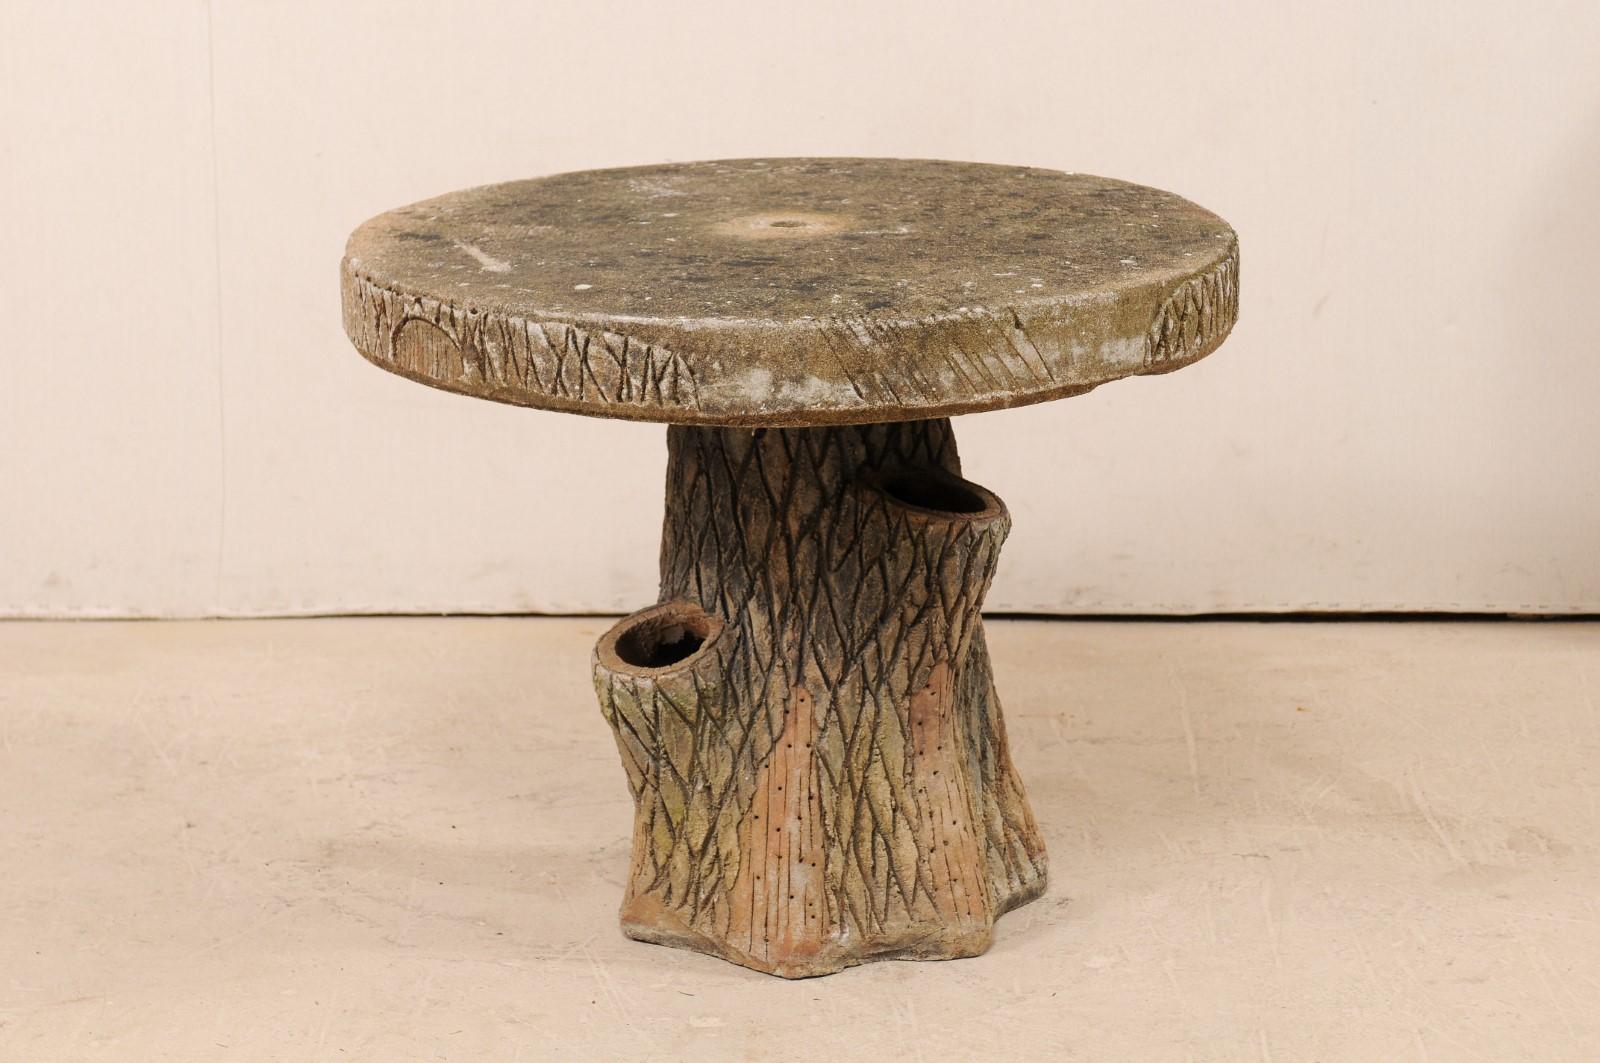 A vintage French faux bois outdoor garden or patio table. This patio table from France has been designed in faux bois fashion, lending it's appearance to resemble that of a tree; the round top a thickly sliced slab, while the base being that of a